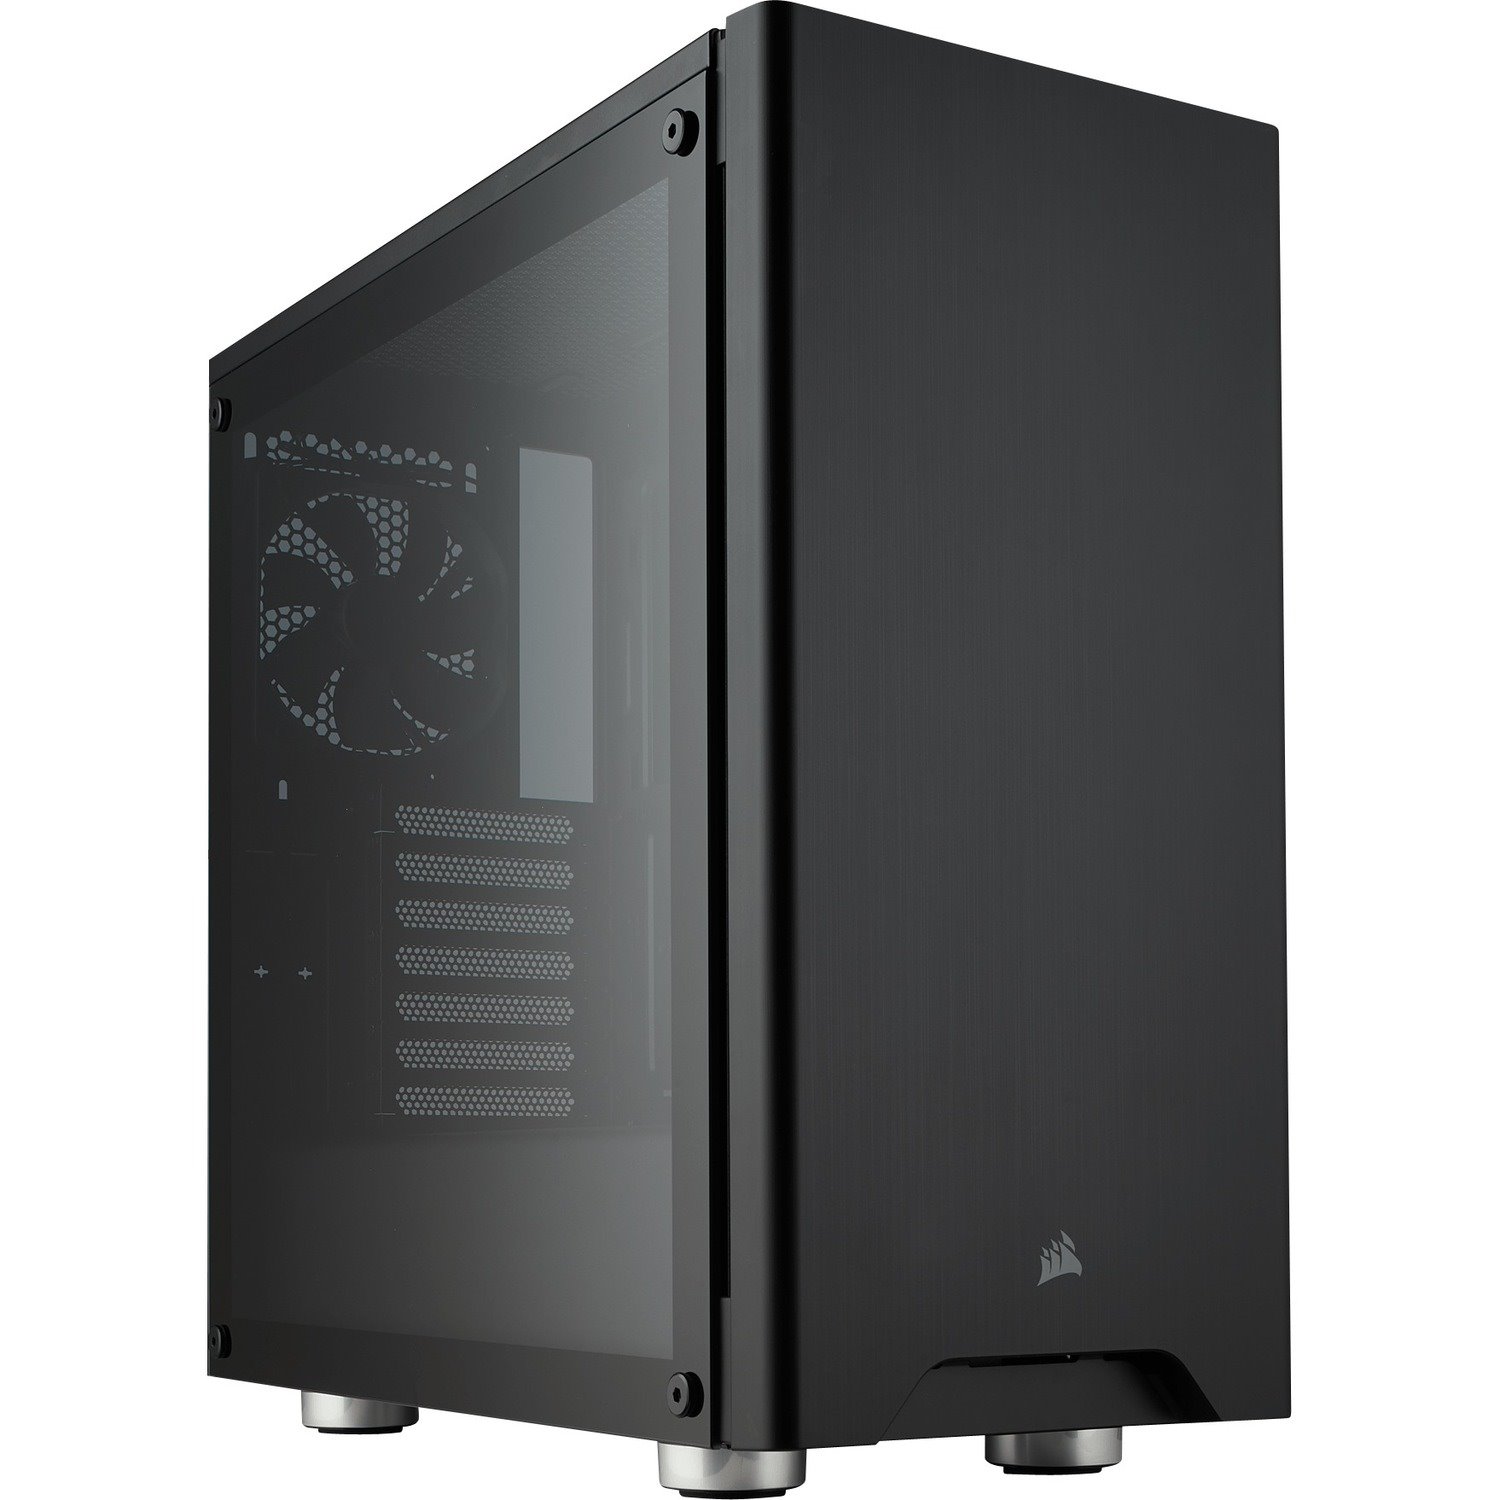 Corsair Carbide 275R Computer Case - ATX, Micro ATX, Mini ITX Motherboard Supported - Mid-tower - Steel, Plastic, Tempered Glass - Black